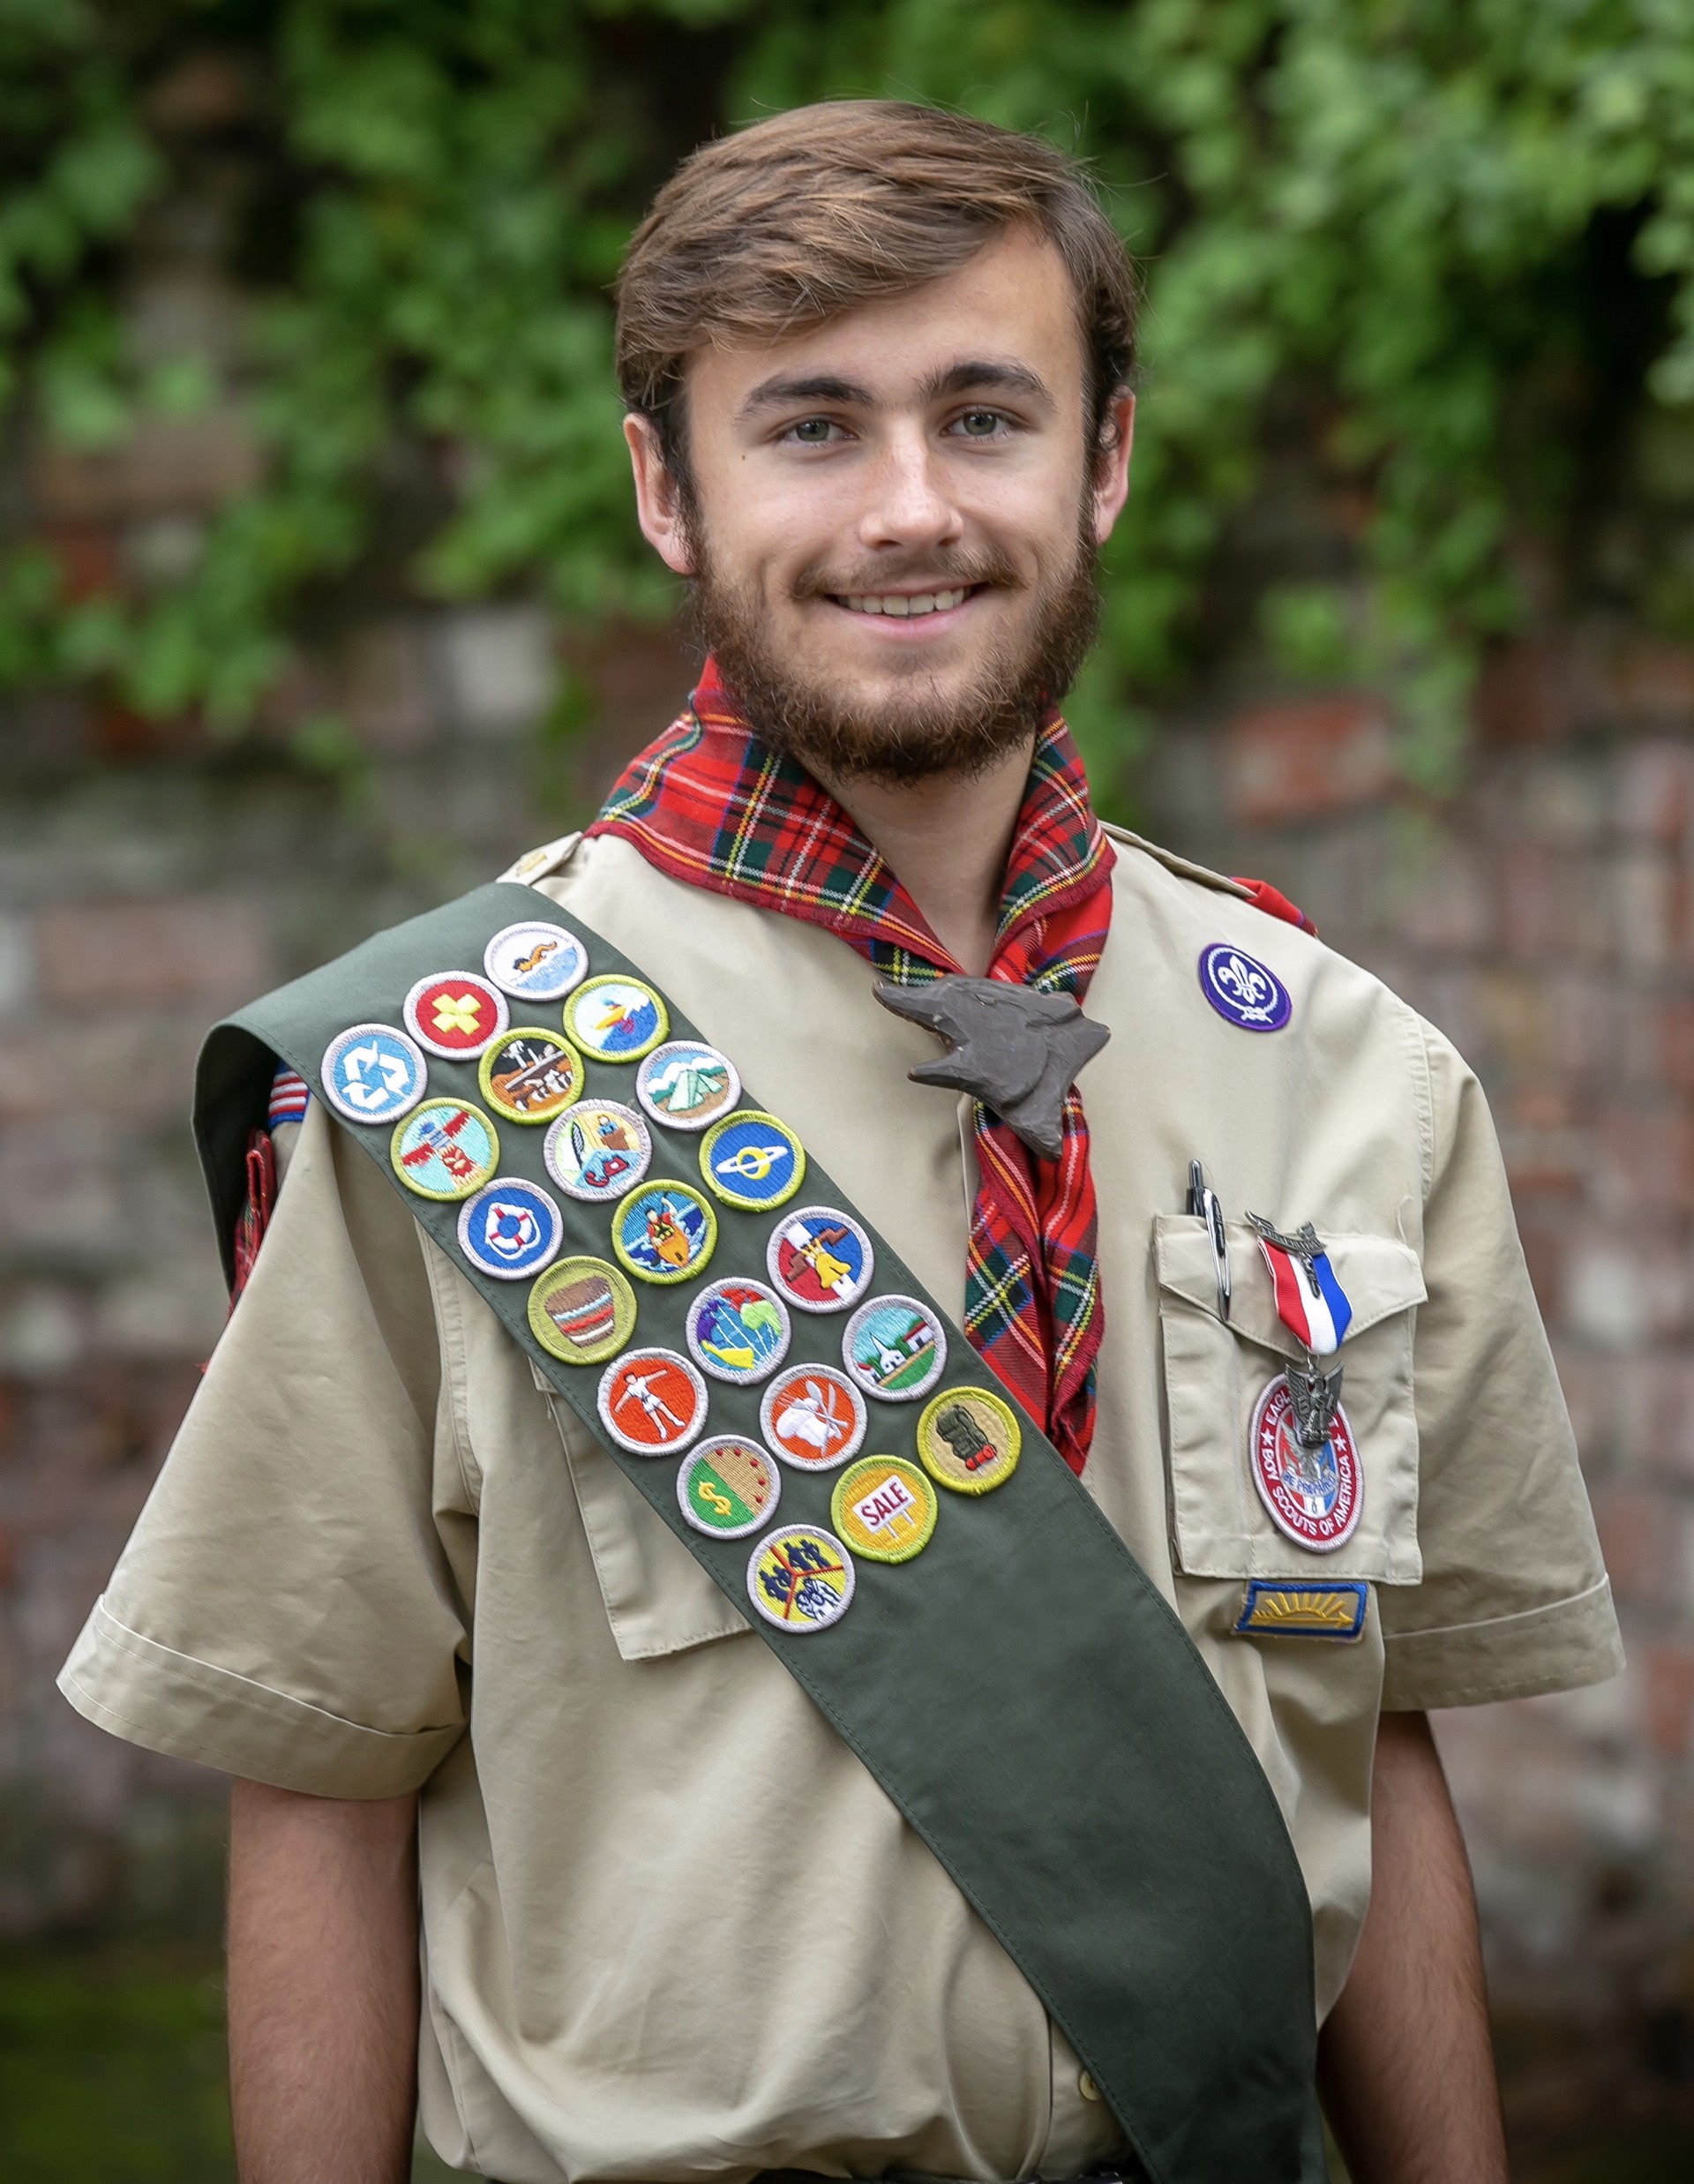 Eagle Scout Jon Davis, a Senior Patrol Leader for Troop 204 in Lafayette, is making himself available to shop for seniors local to him who need food or hardware supplies over the next few weeks.